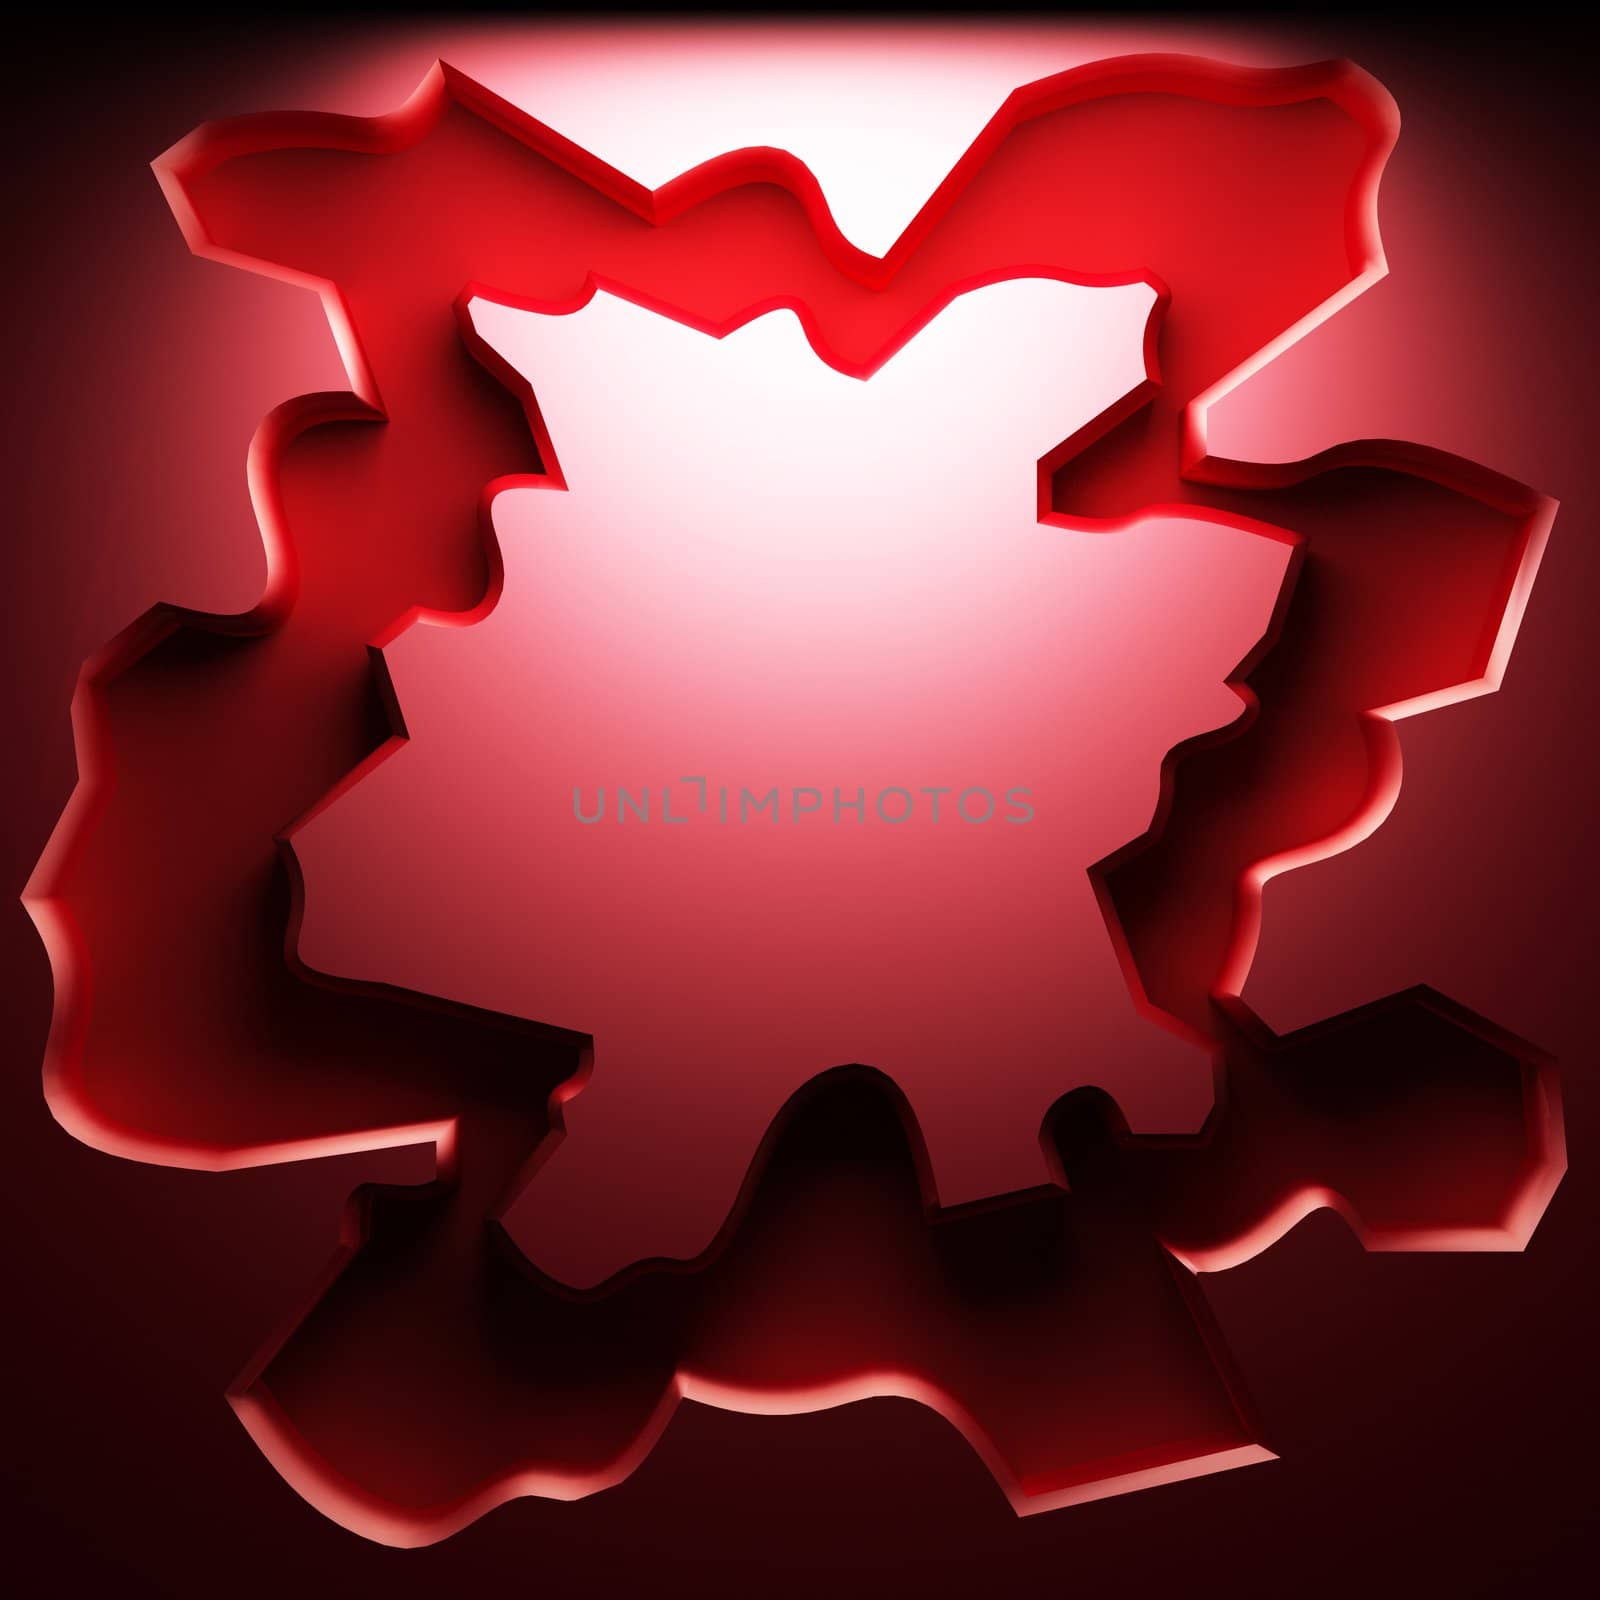 abstract plate made in 3D graphics